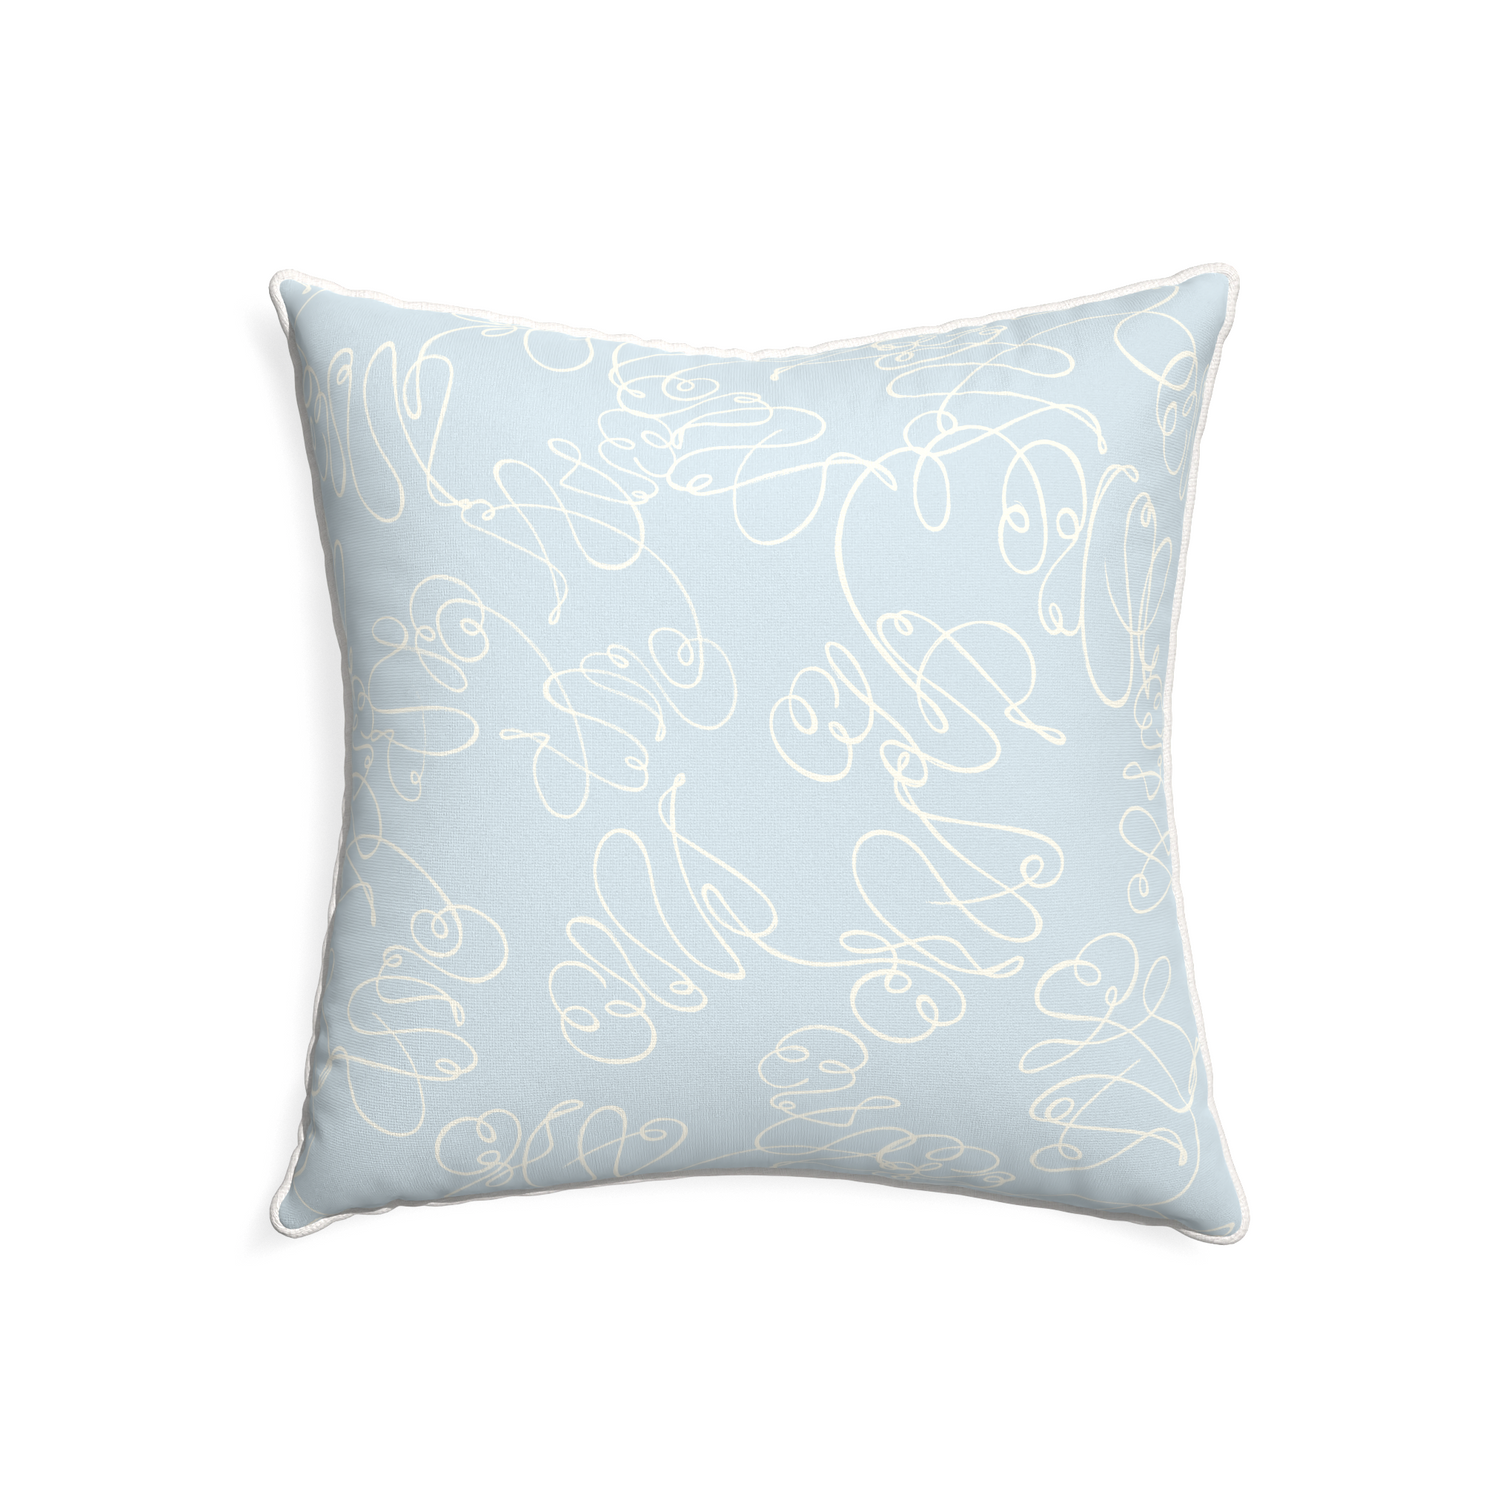 22-square mirabella custom pillow with snow piping on white background